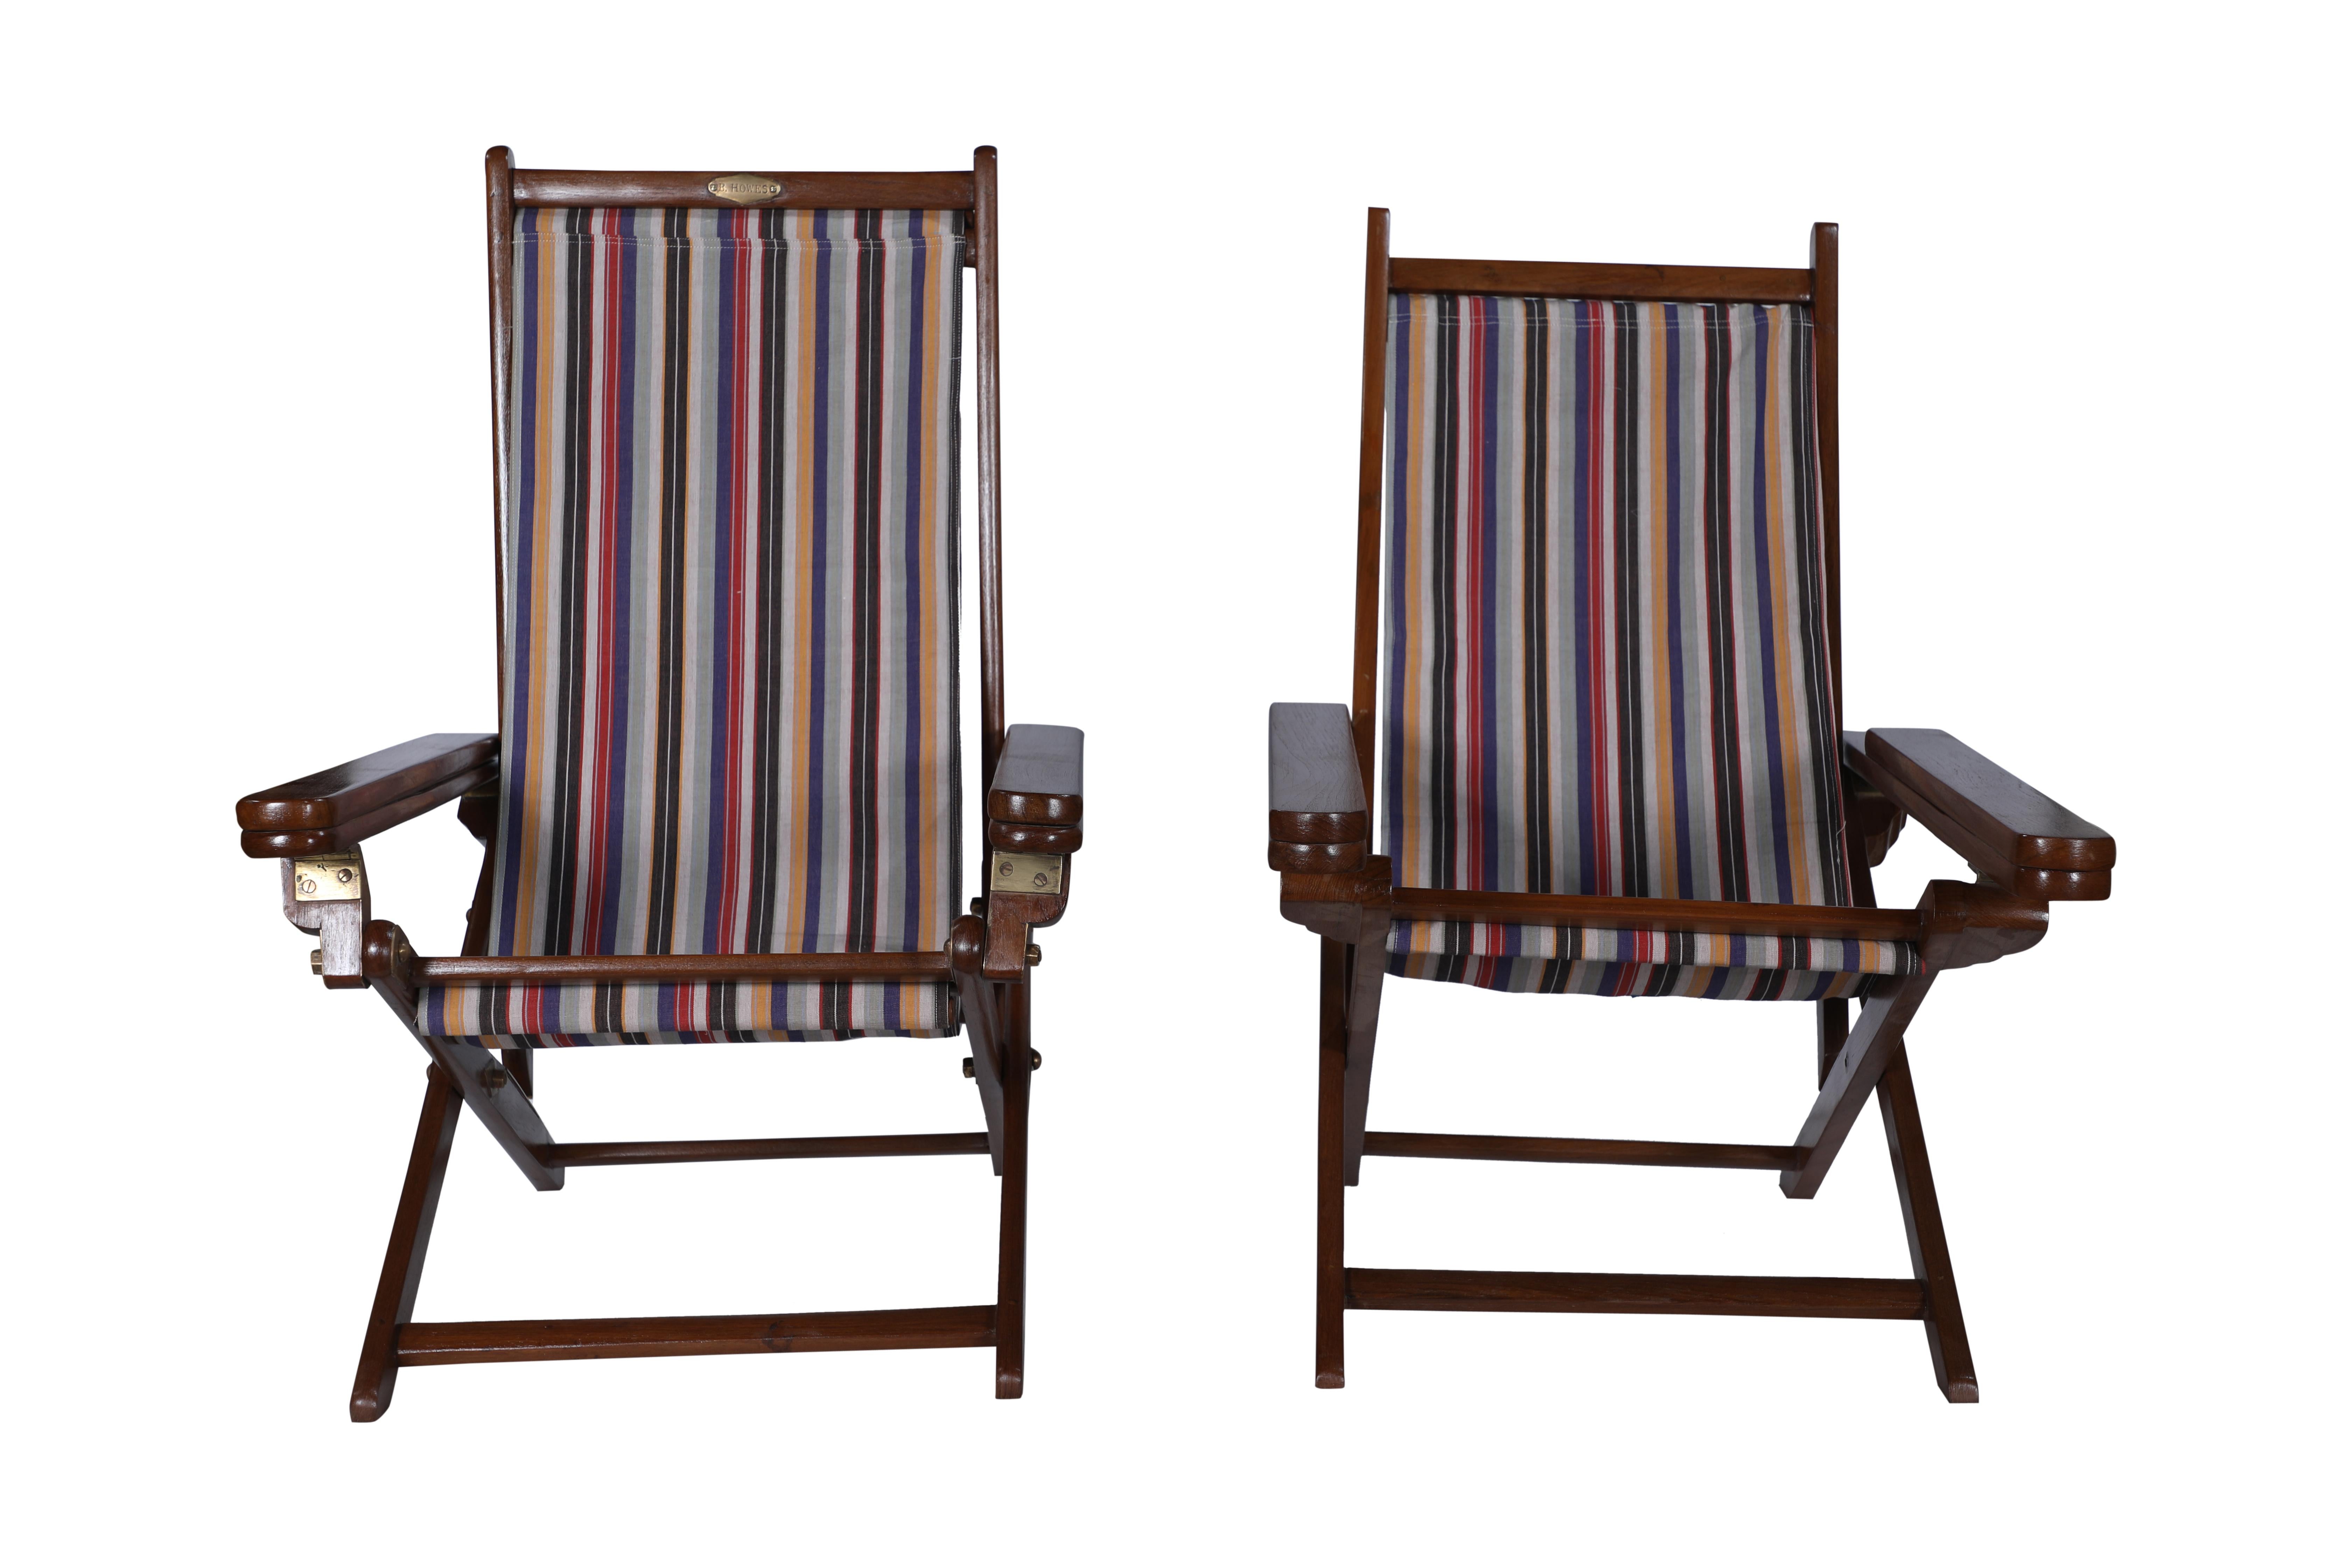 British Colonial Pair of Canvas Sling-Back Campaign Folding, Adjustable Teak Chairs w/ Leg Rests